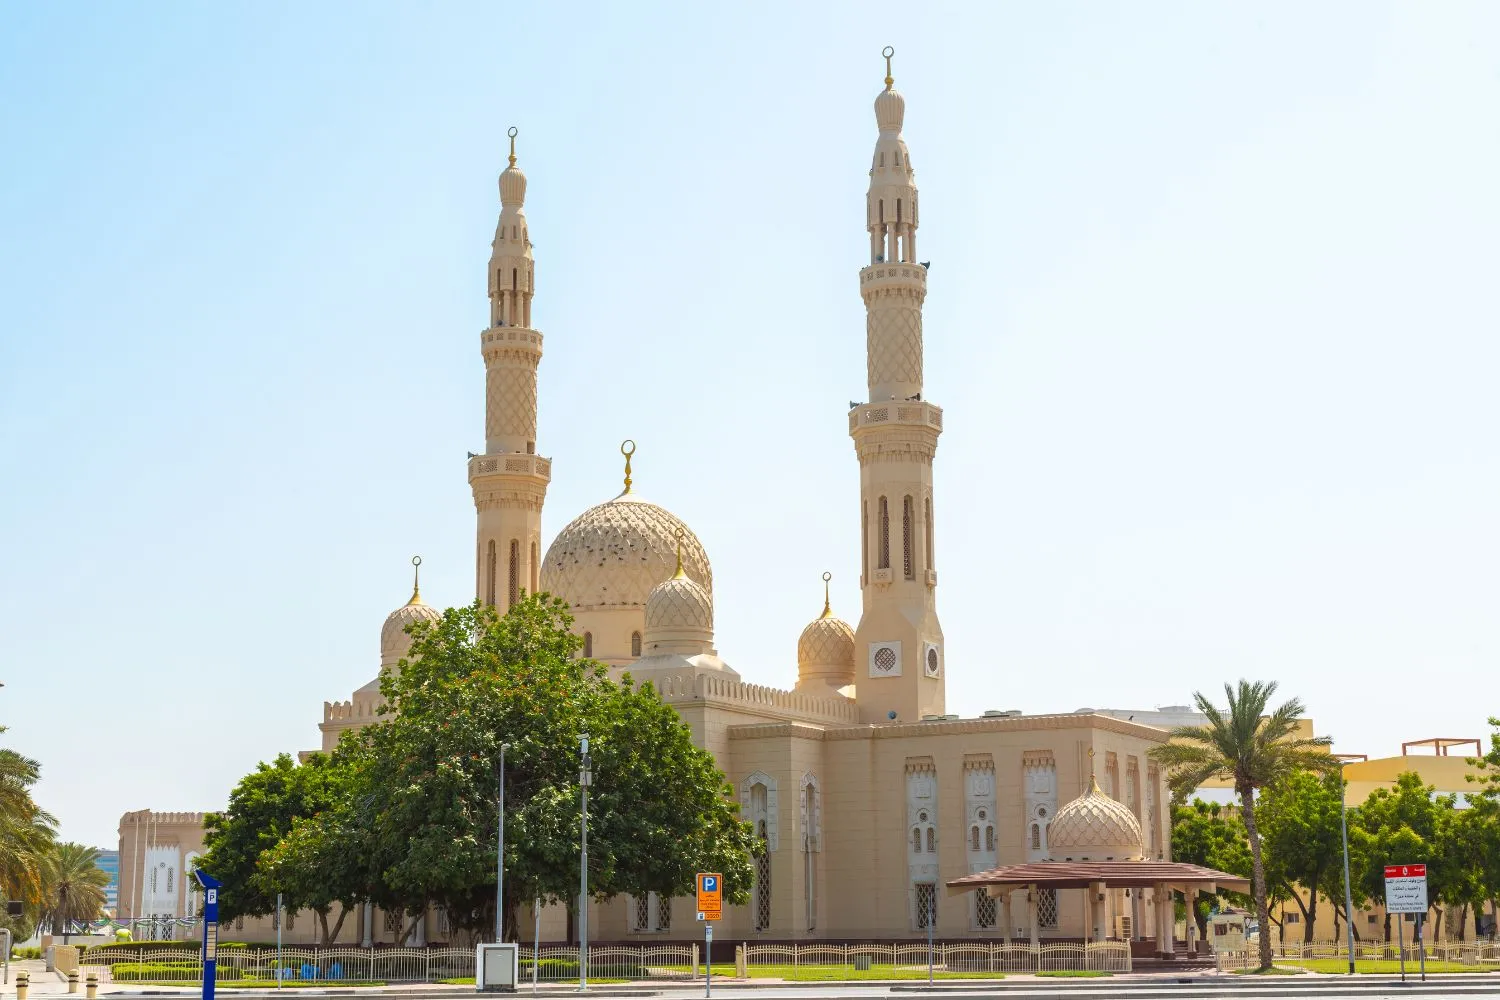 The Historical Mosques of Dubai